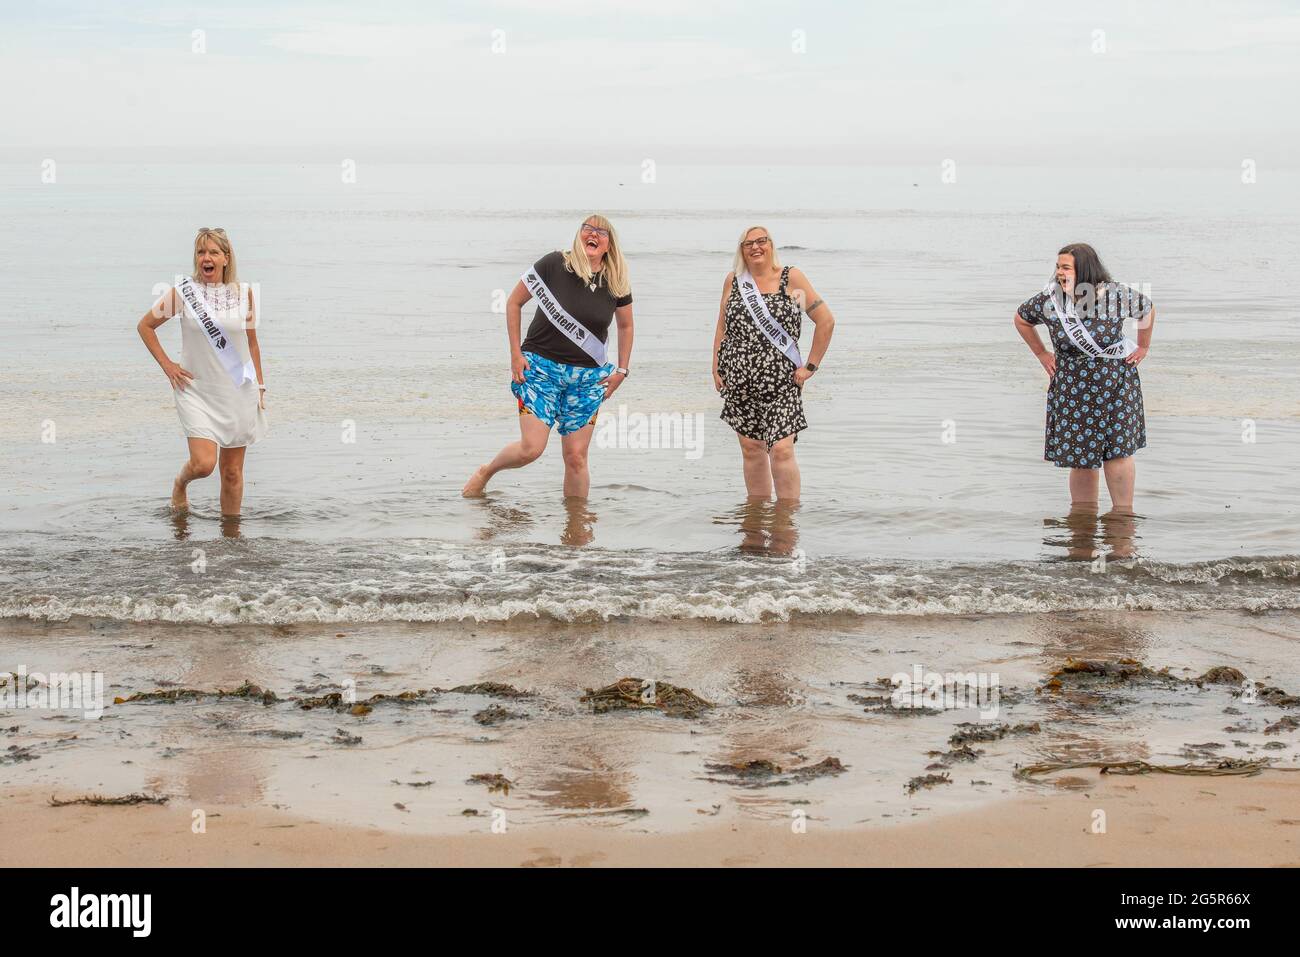 St Andrews, Fife, UK.  Soon-to-be University of St Andrews graduates Yvonne Smith, Audrey Field, Katrina Peattie and Sarah Ramage celebrating with a paddle in the North Sea.  The foursome graduate as part of the Scottish Wider Access Programme.  SWAP East is a partnership between colleges and universities in the east of Scotland that aims to promote and support access to higher education for adults.  Over 1900 students will be conferred their degrees virtually this week due to Covid-19 restrictions. Photo by Gayle McIntyre Stock Photo